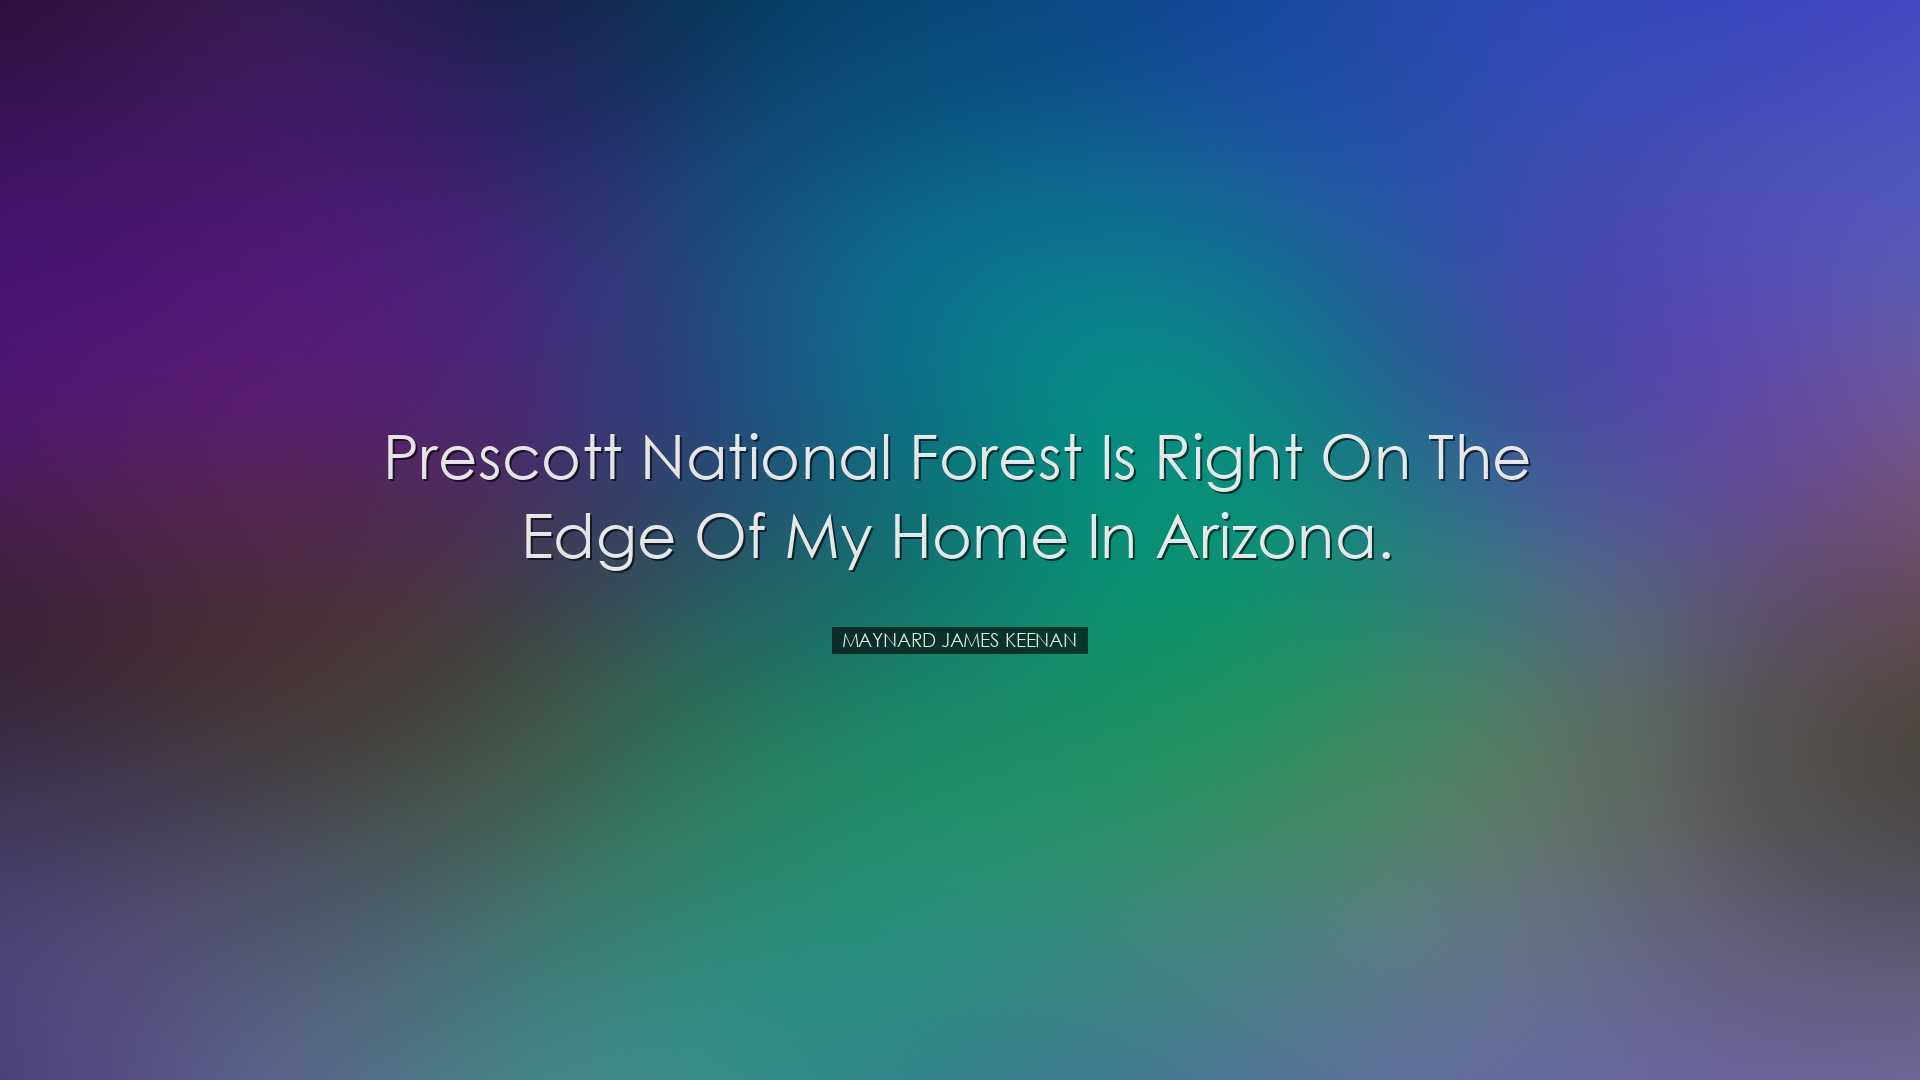 Prescott National Forest is right on the edge of my home in Arizon